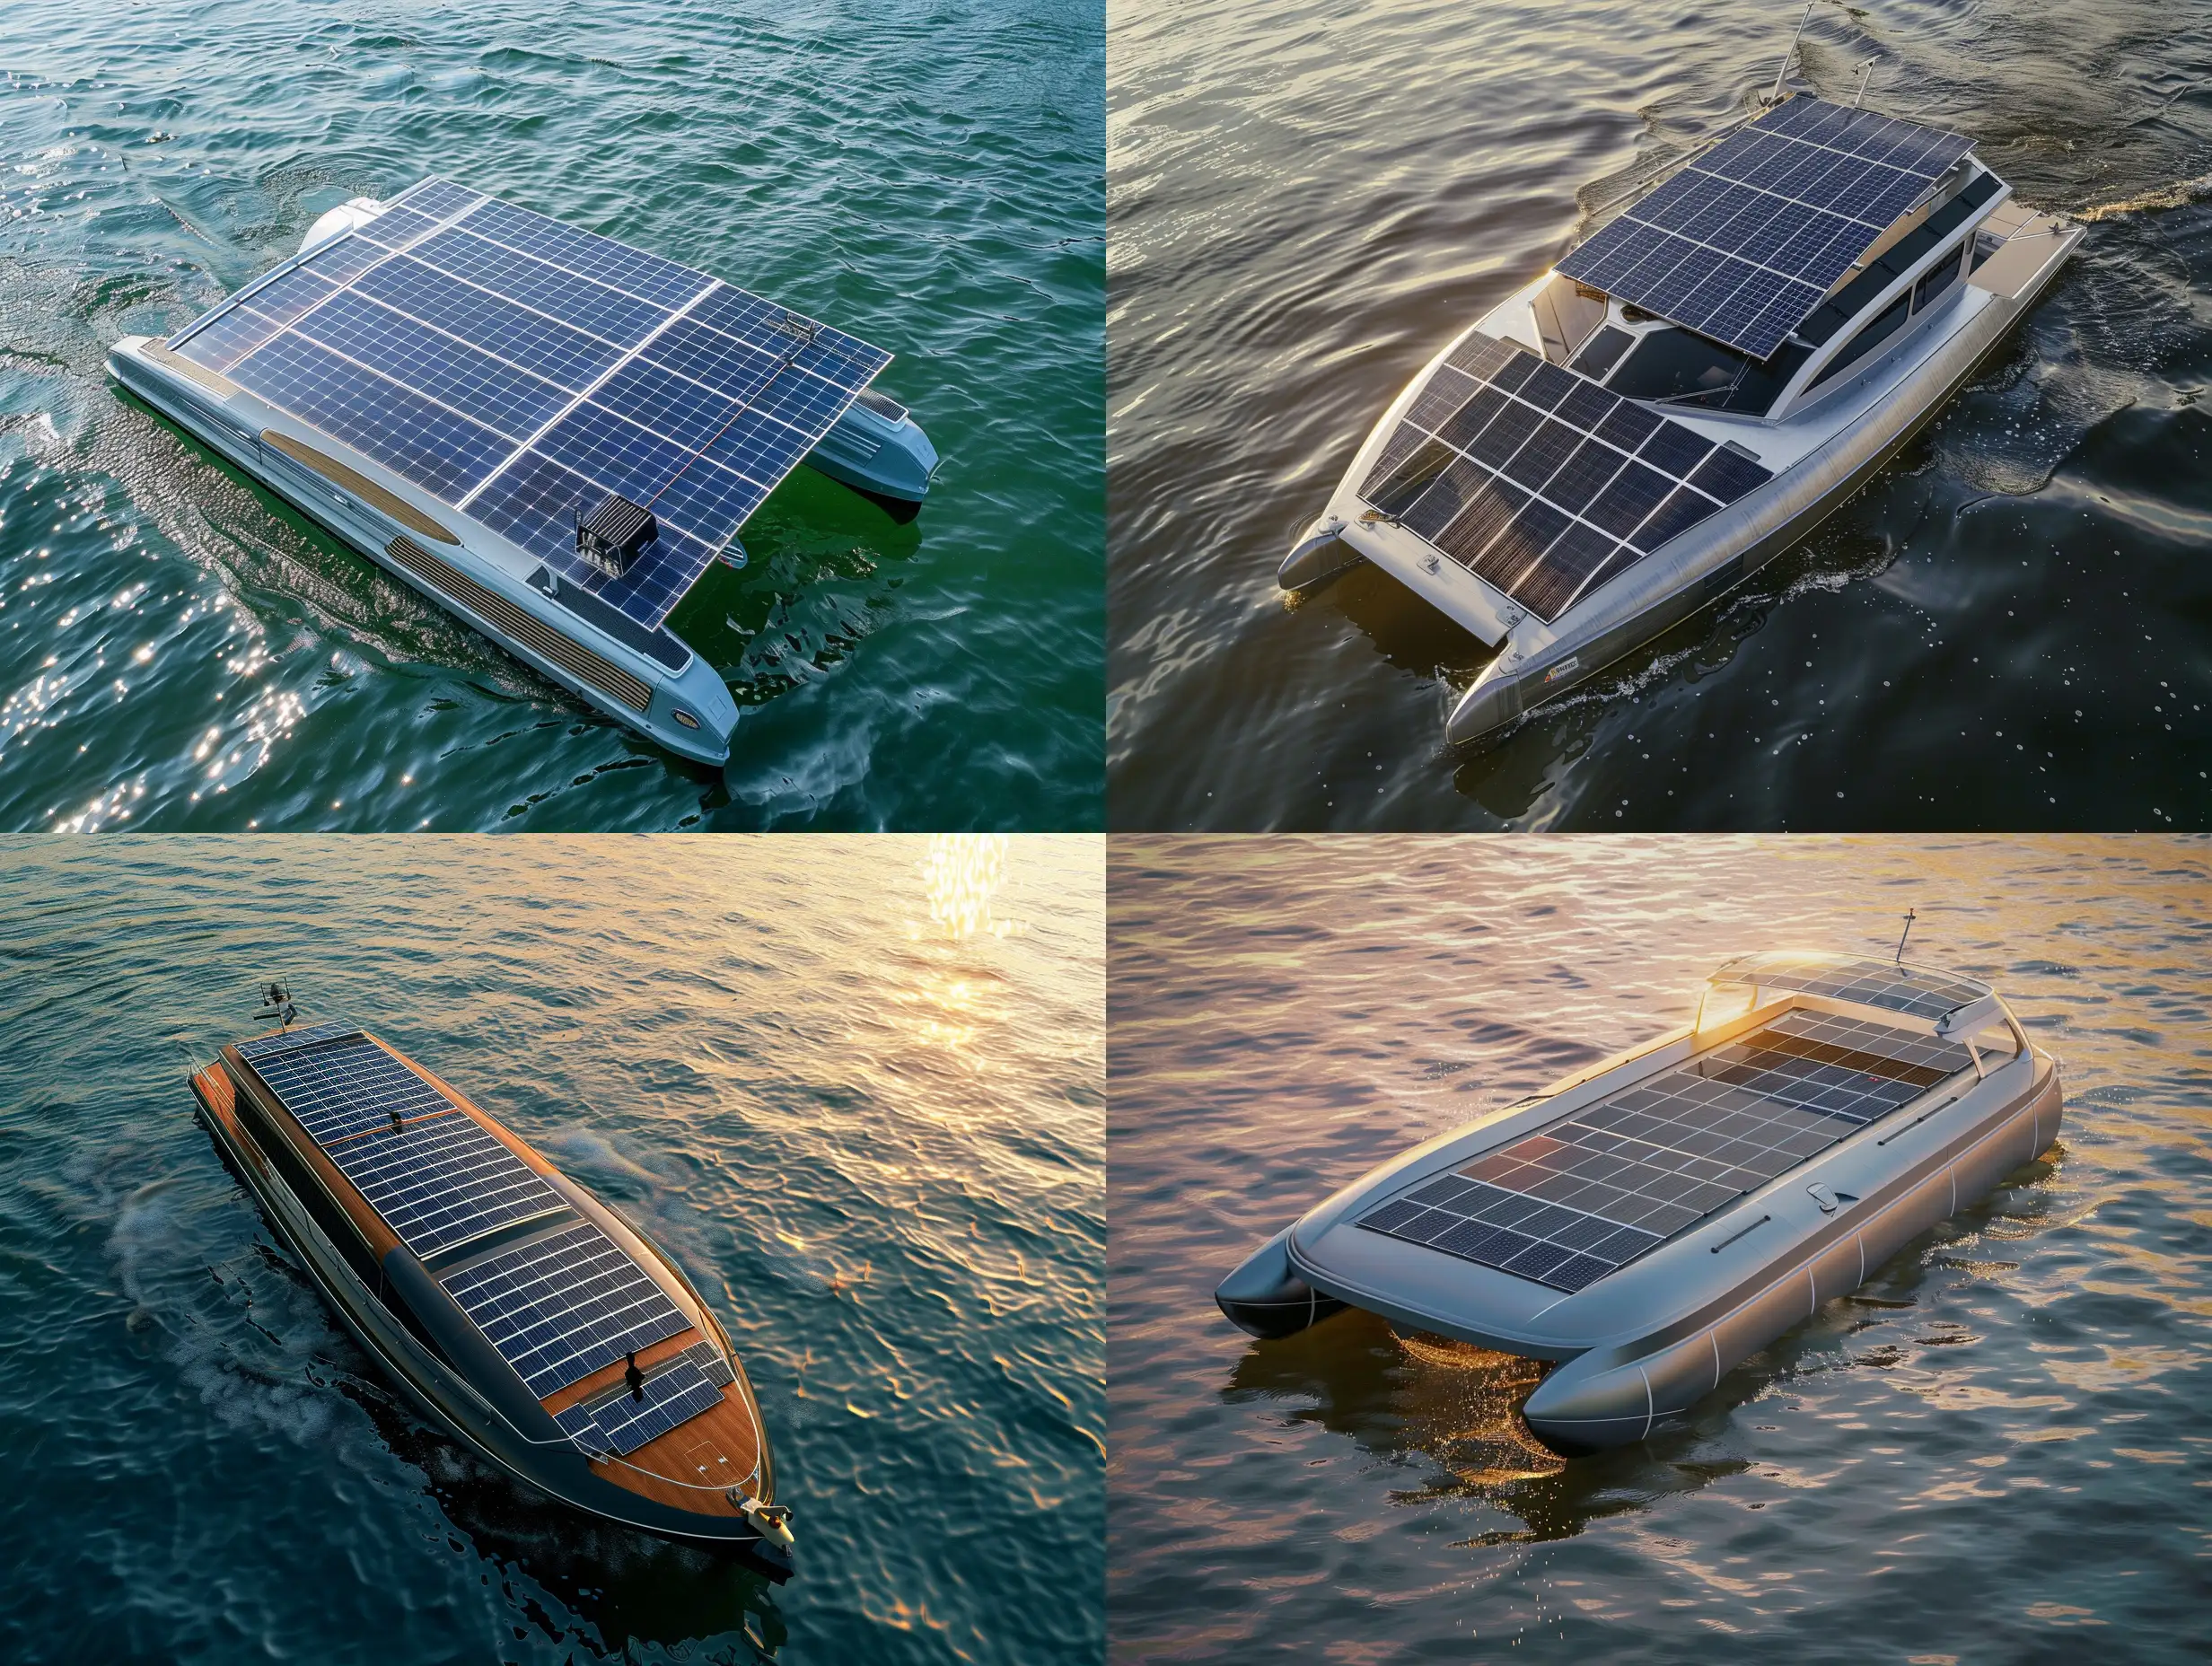 Realistic-Recreational-Boat-with-Solar-Panels-on-Water-from-Drone-View